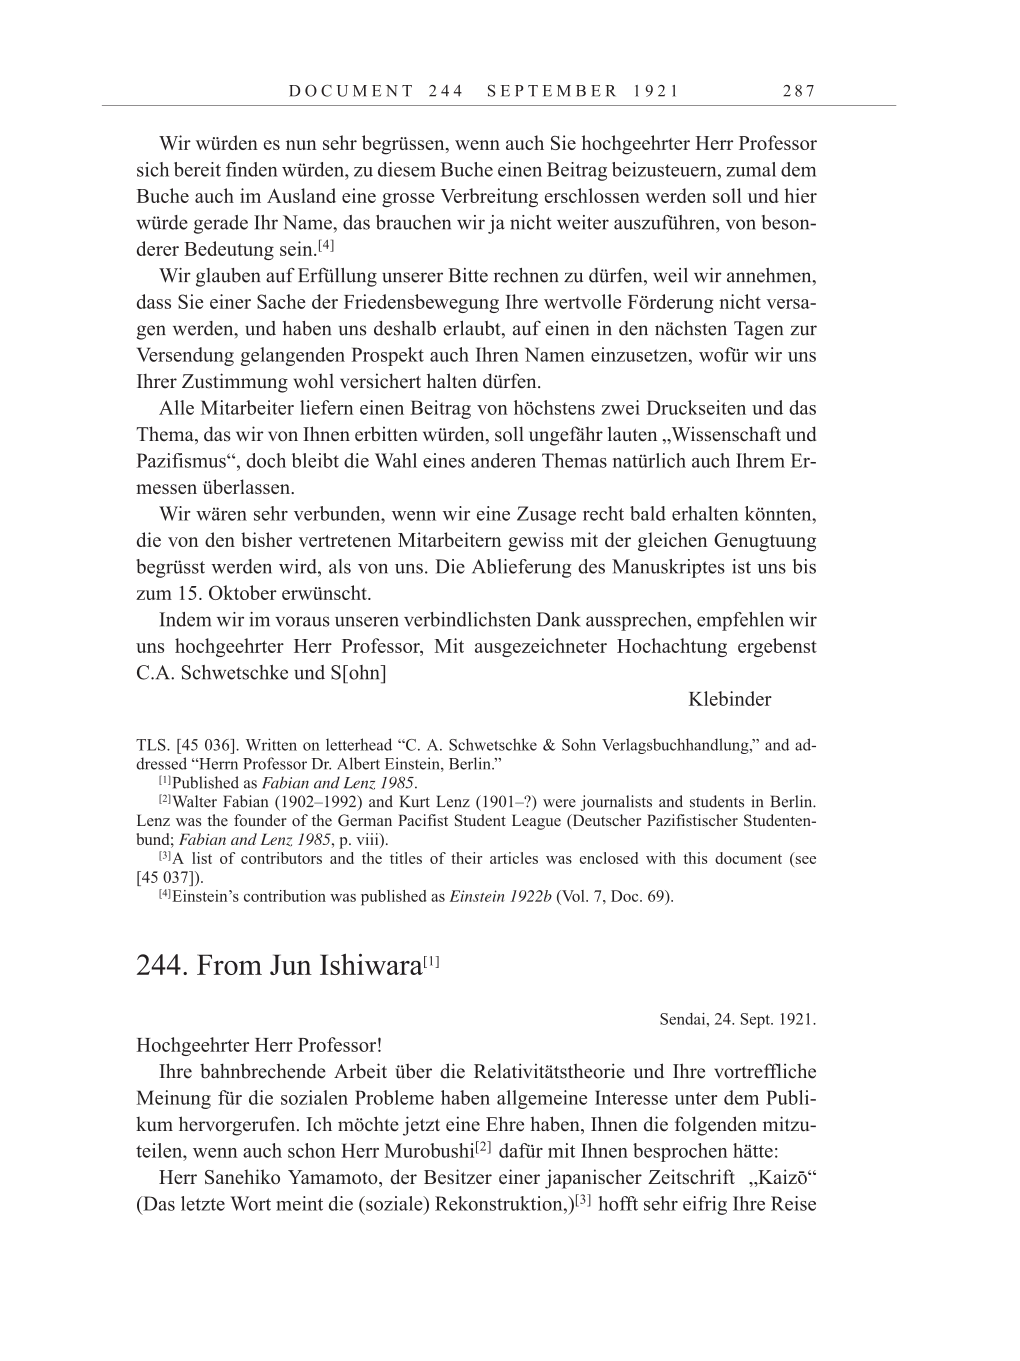 Volume 12: The Berlin Years: Correspondence January-December 1921 page 287